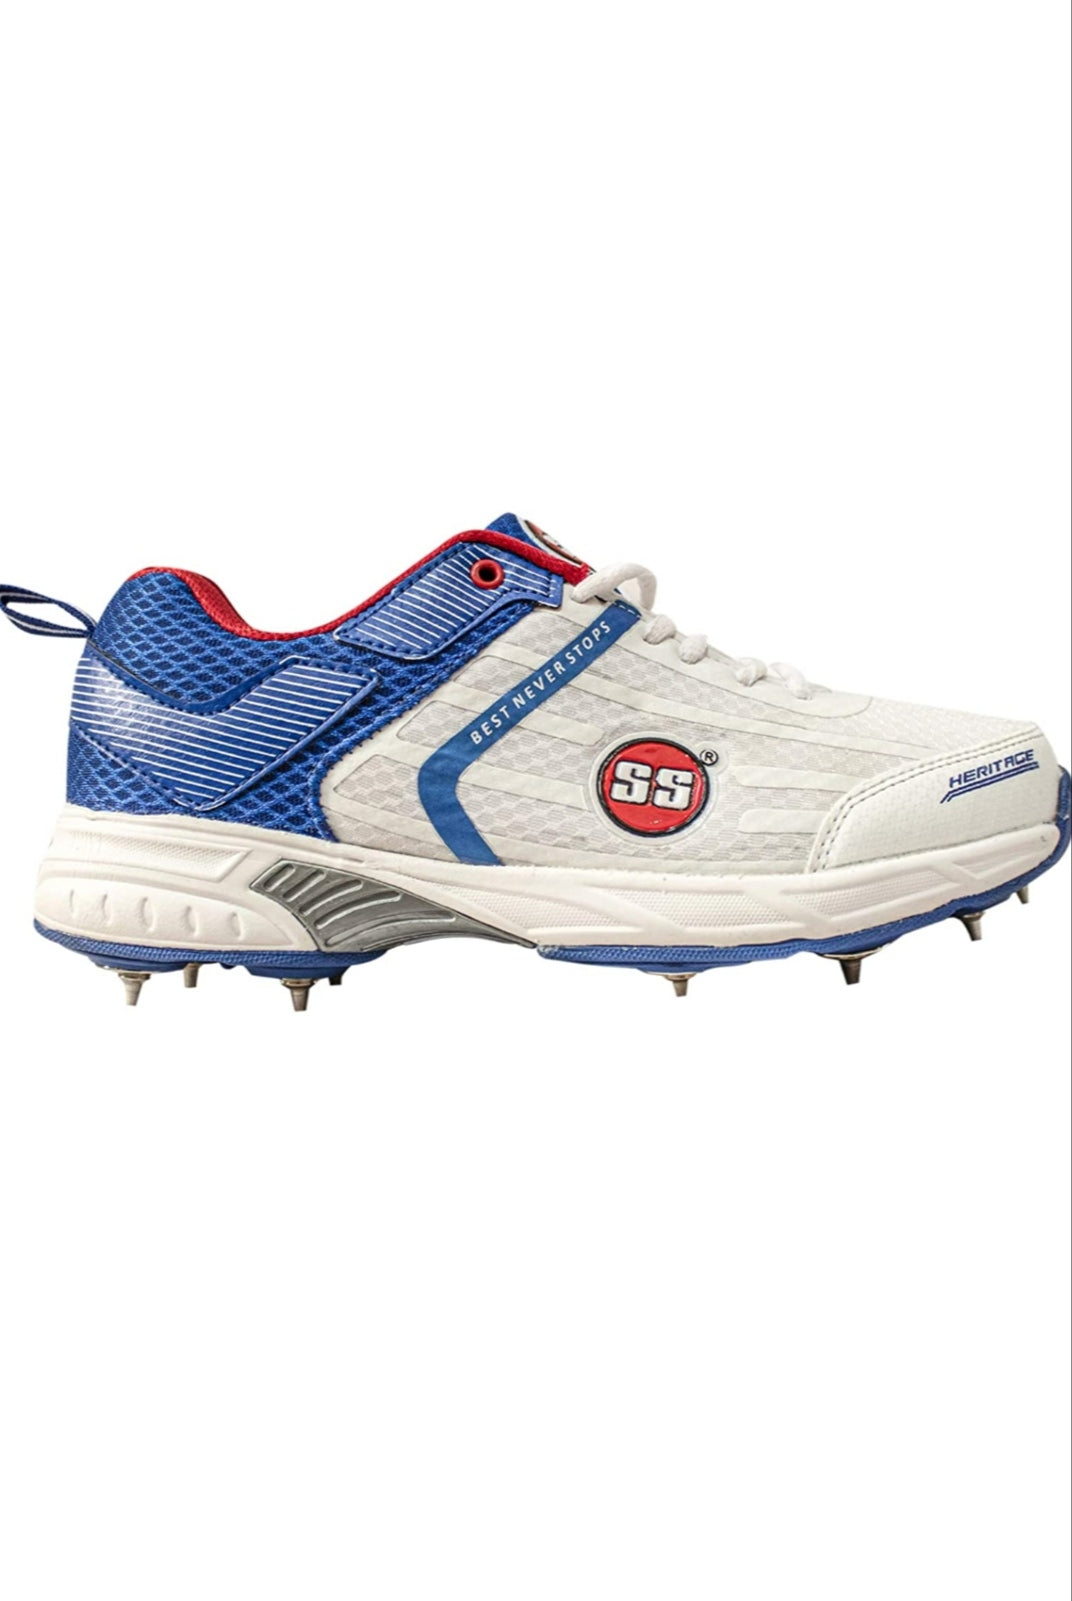 Buy SS Heritage Cricket Shoes Spikes @ Lowest Price - Sportsuncle